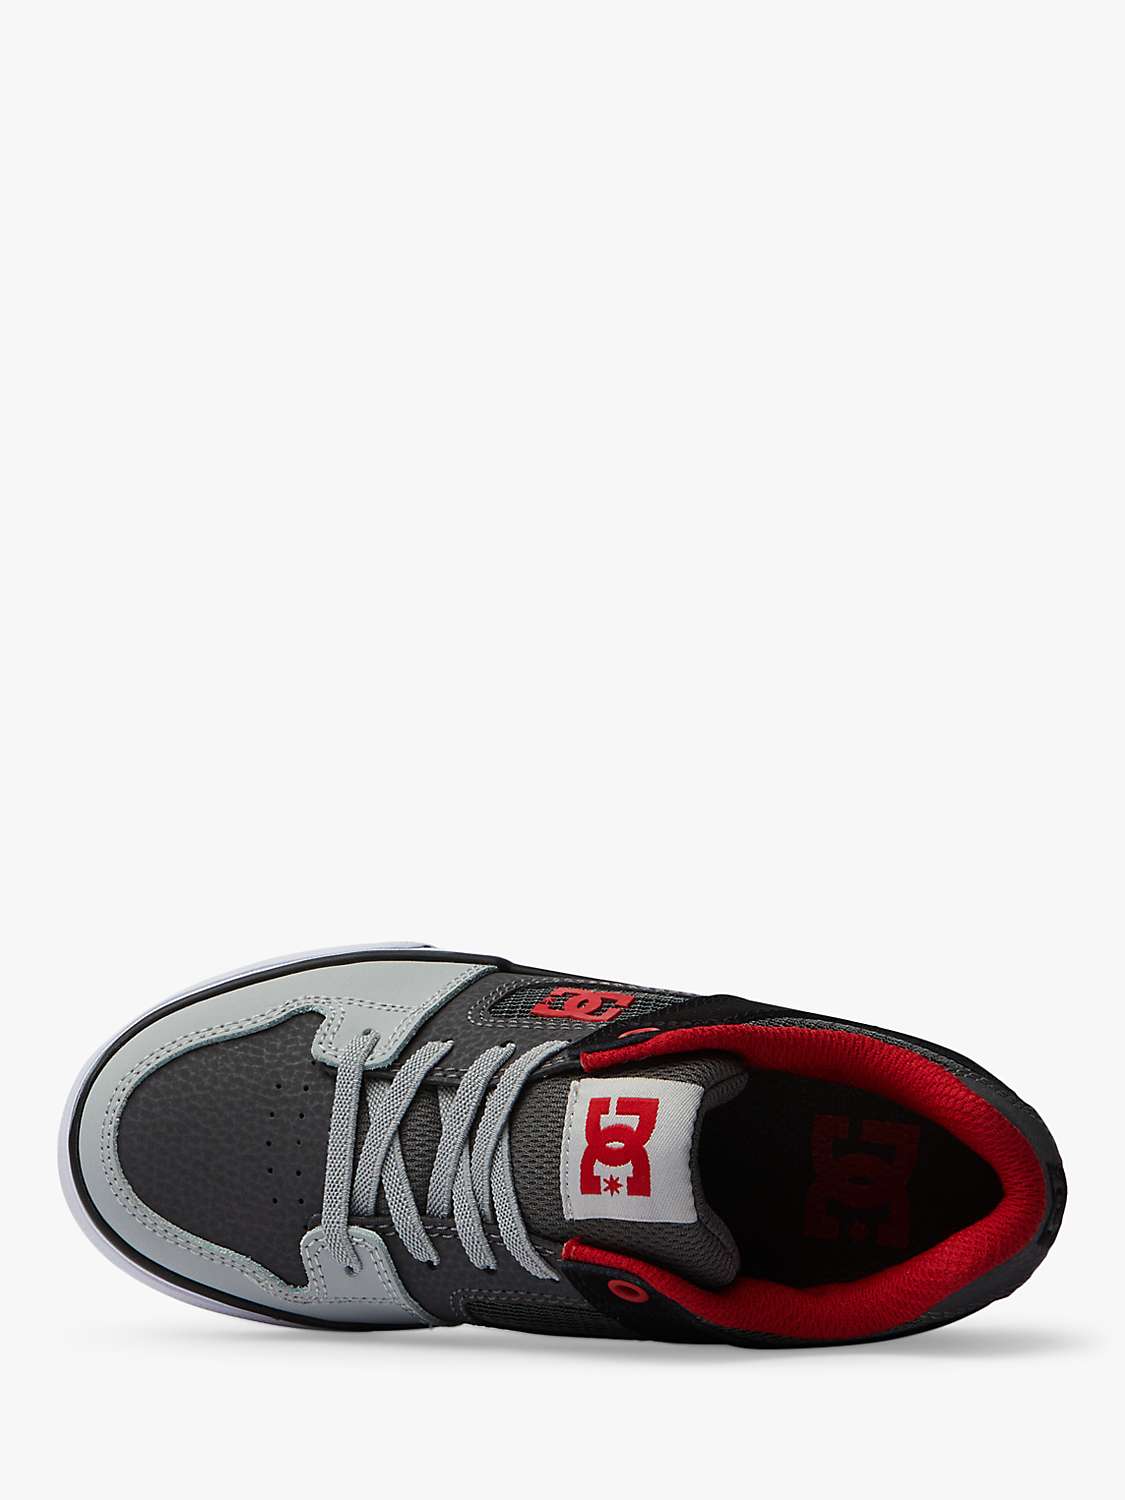 Buy DC Shoes Kids' Leather Pure Elastic Trainers, Grey/Red/Multi Online at johnlewis.com